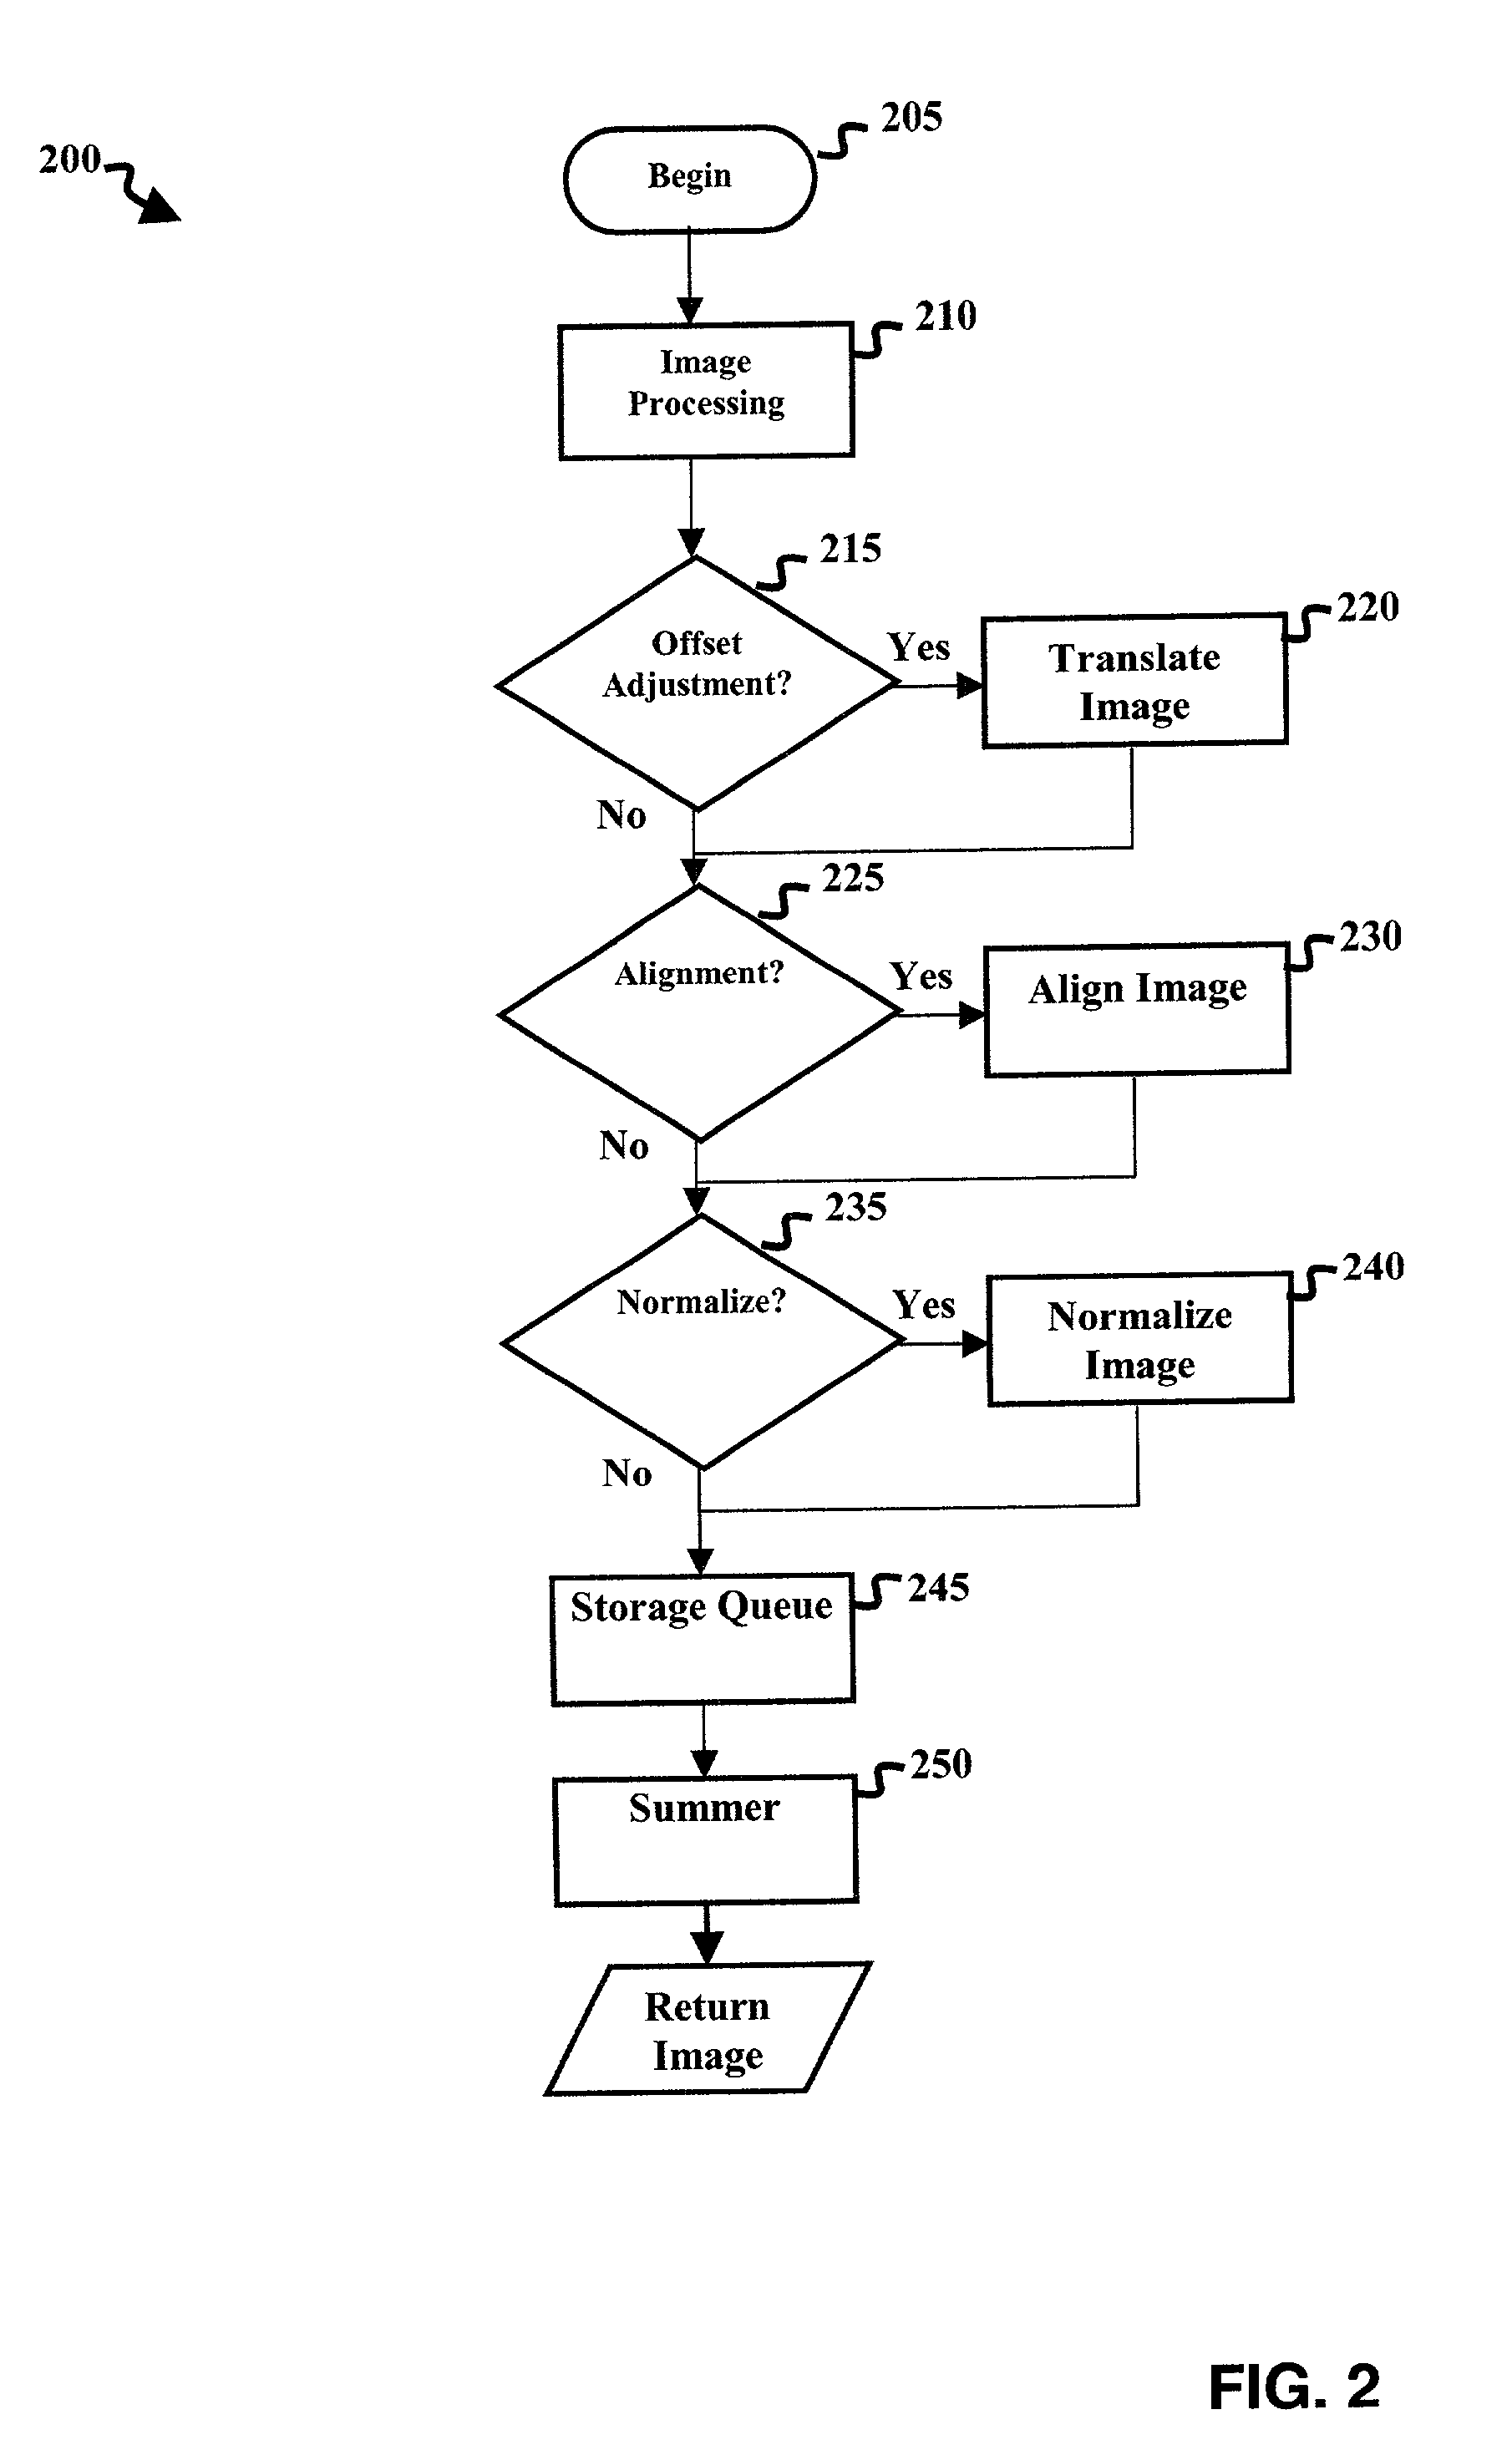 Image defect display system